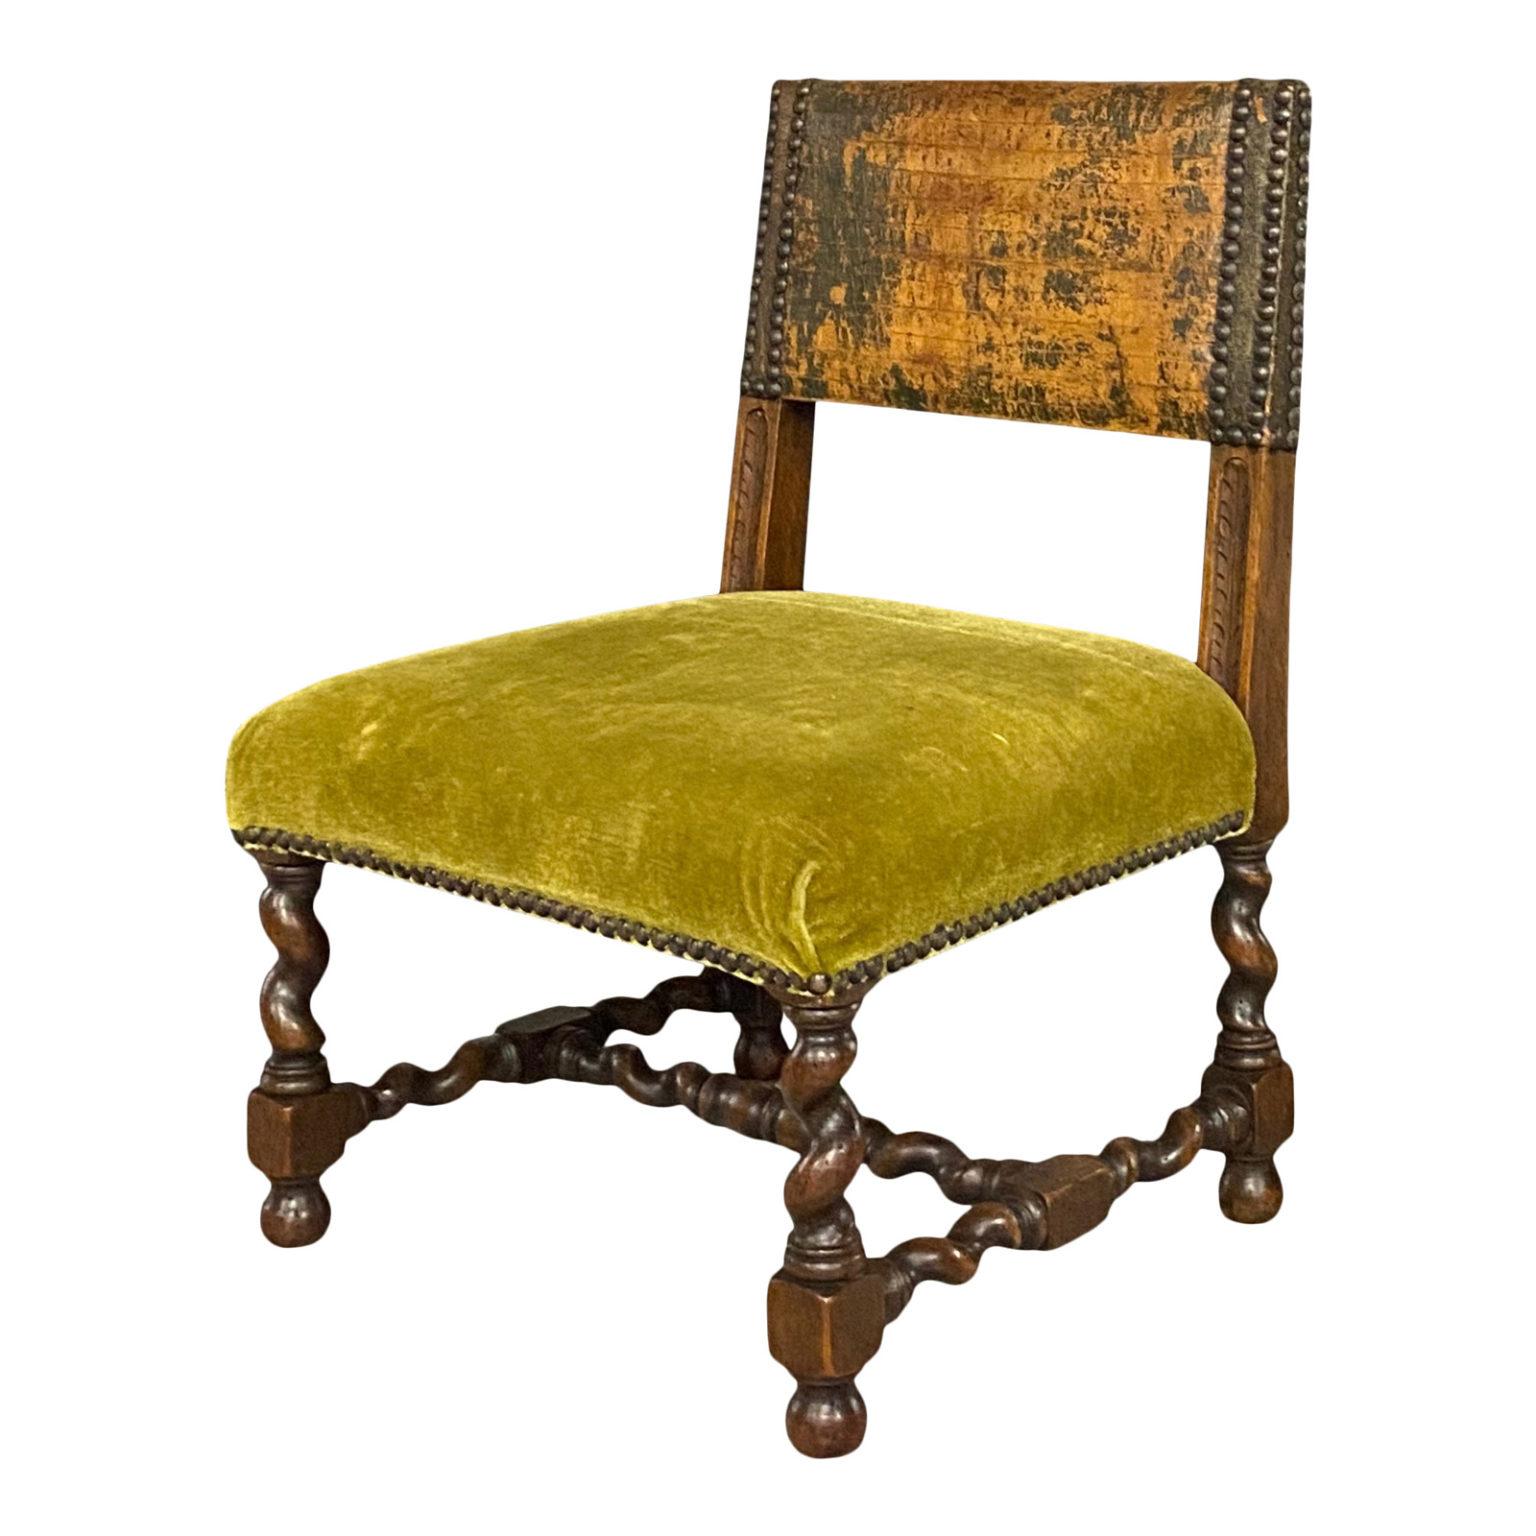 Charming antique Welsh children’s chair upholstered in green mohair and leather from the 17th century

Turned legs and stretchers

23?H x 14?D x 11? Seat Height, 16?.